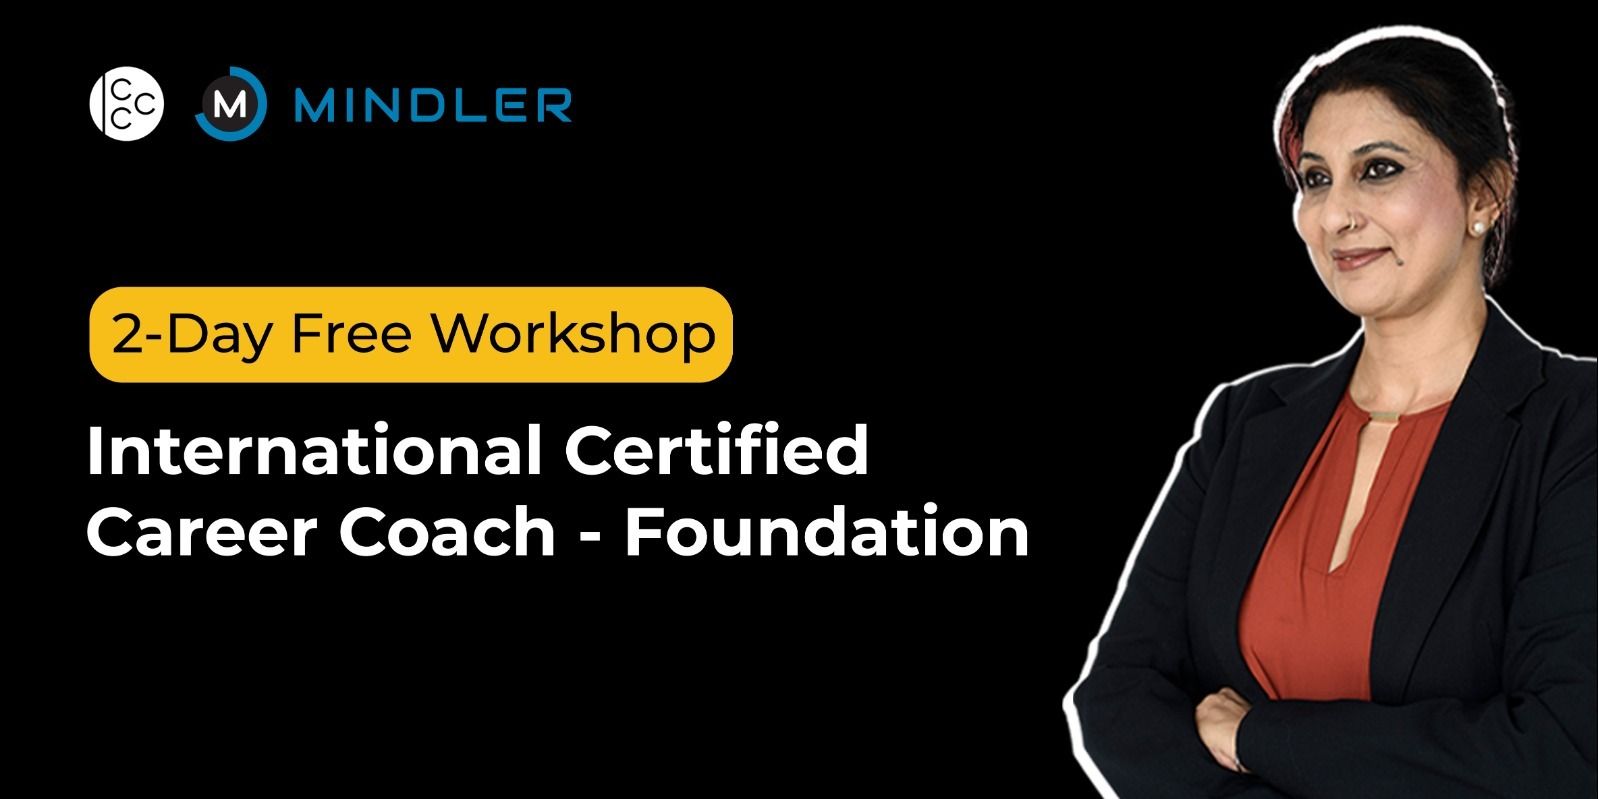 International Certified Career Coach - Foundation  conferences,online-streaming-events Event Tickets Mumbai - BookMyShow